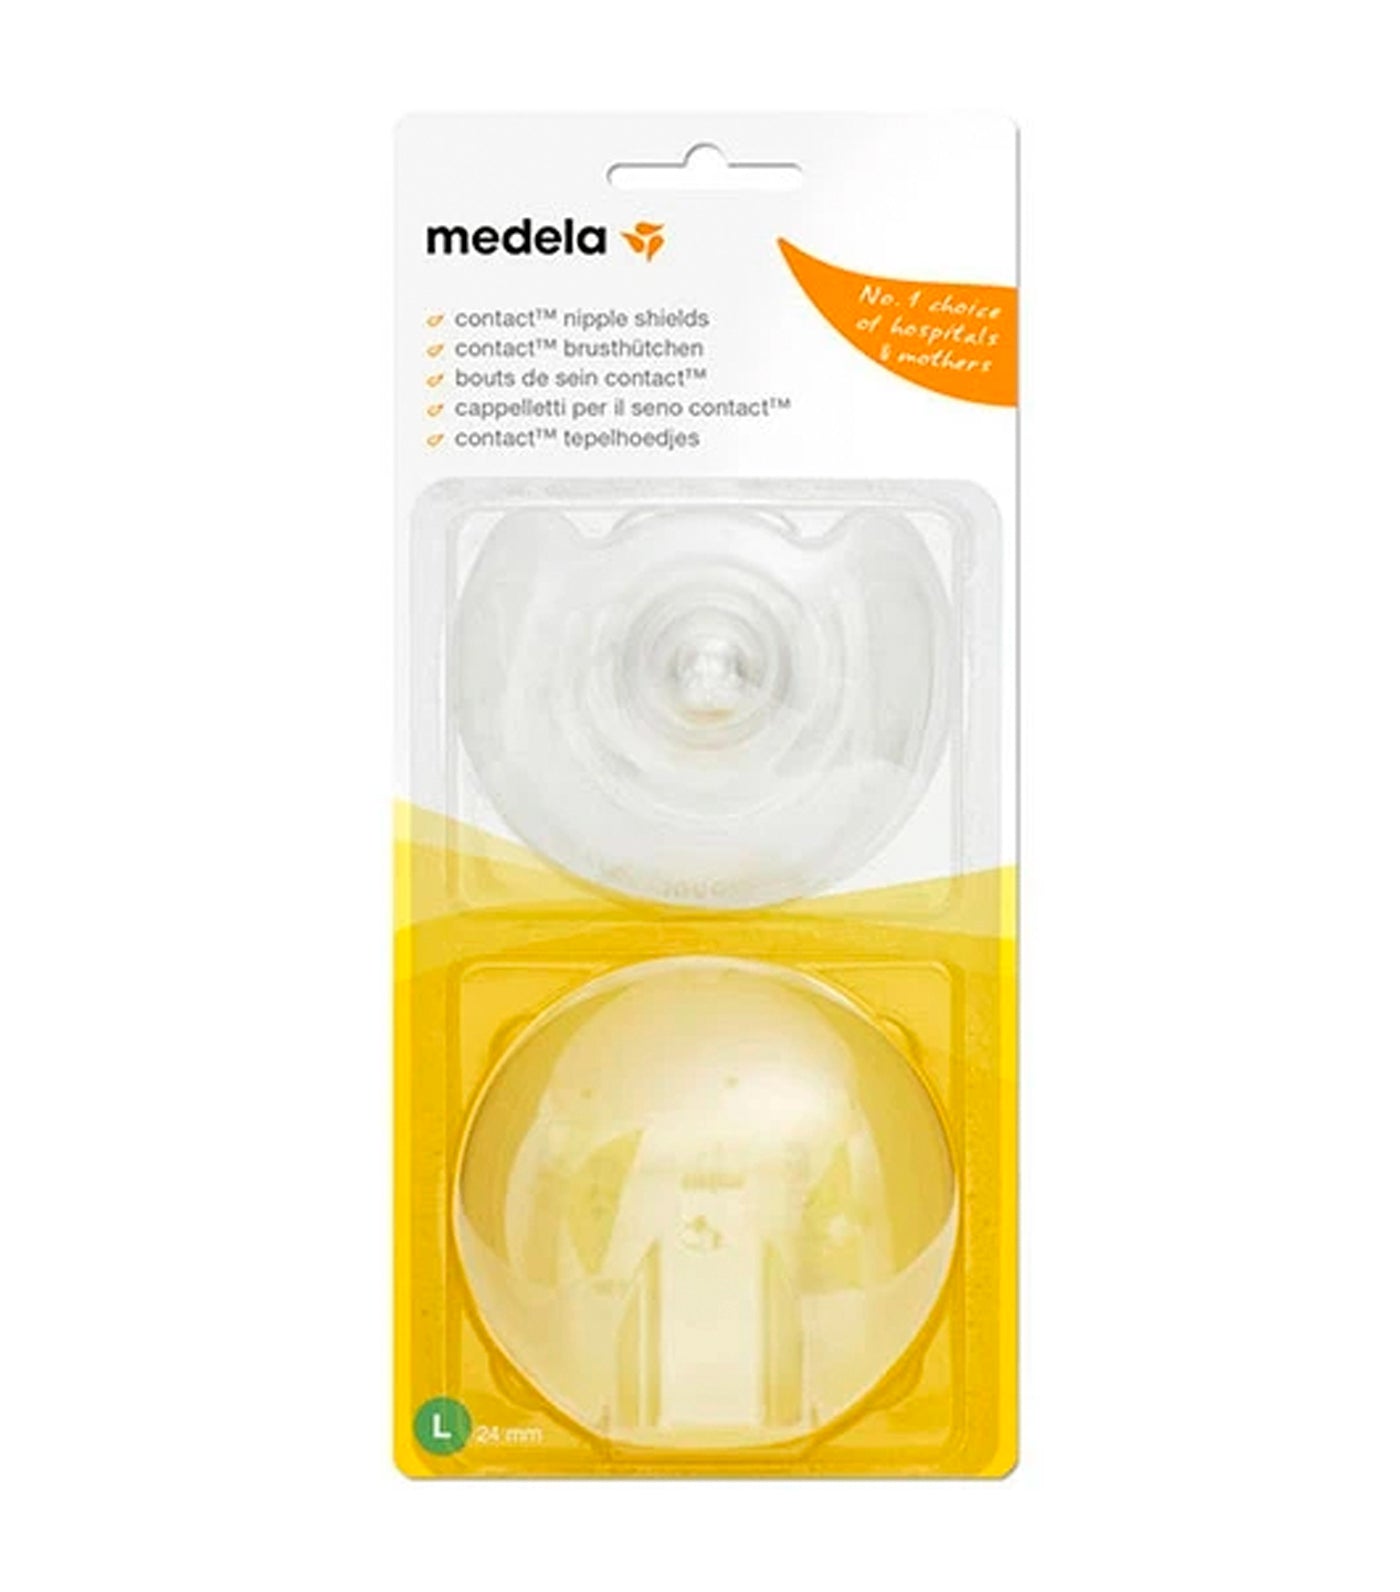 medela contact nipple shields with carrying case (large)